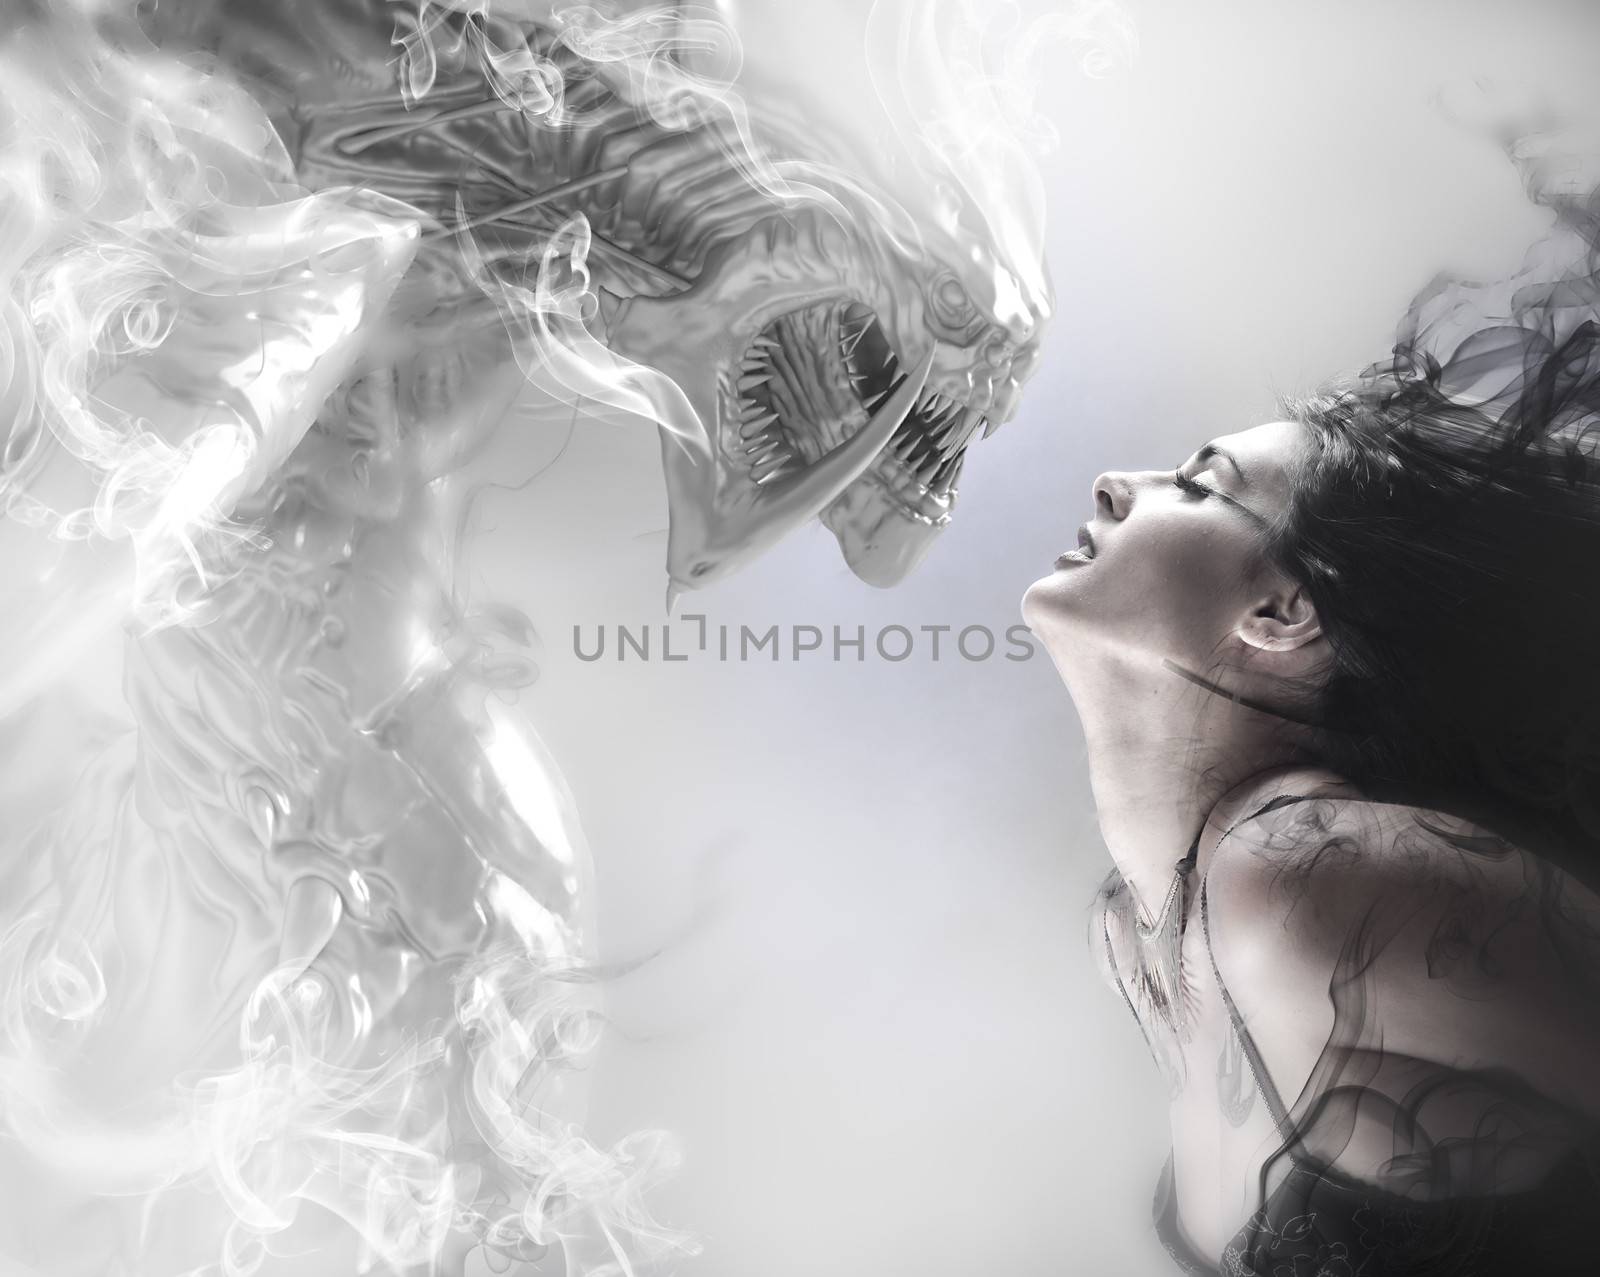 beauty and the beast, beautiful woman kissing a monster by FernandoCortes